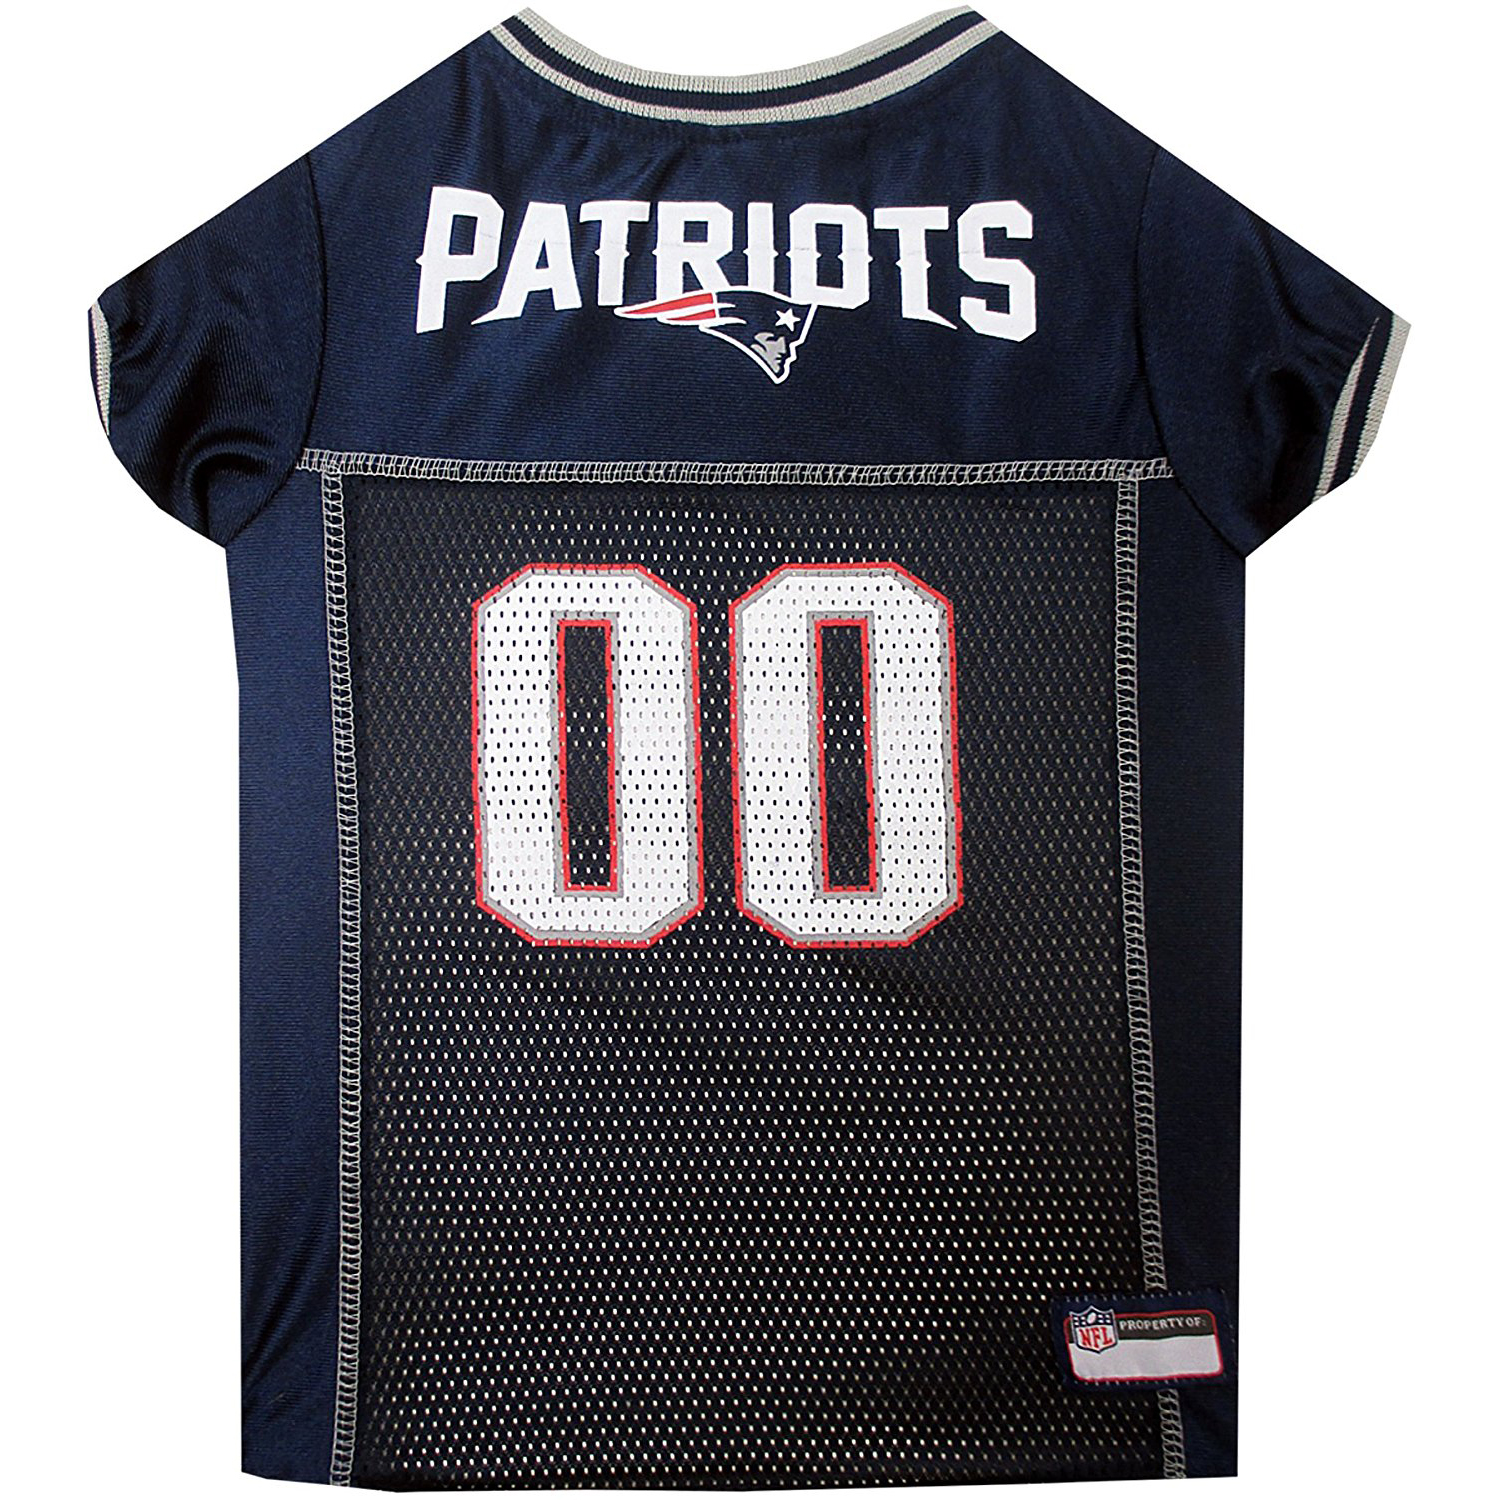 Pets First NFL New England PatriotsLicensed Mesh Jersey for Dogs and Cats - Small - image 1 of 6